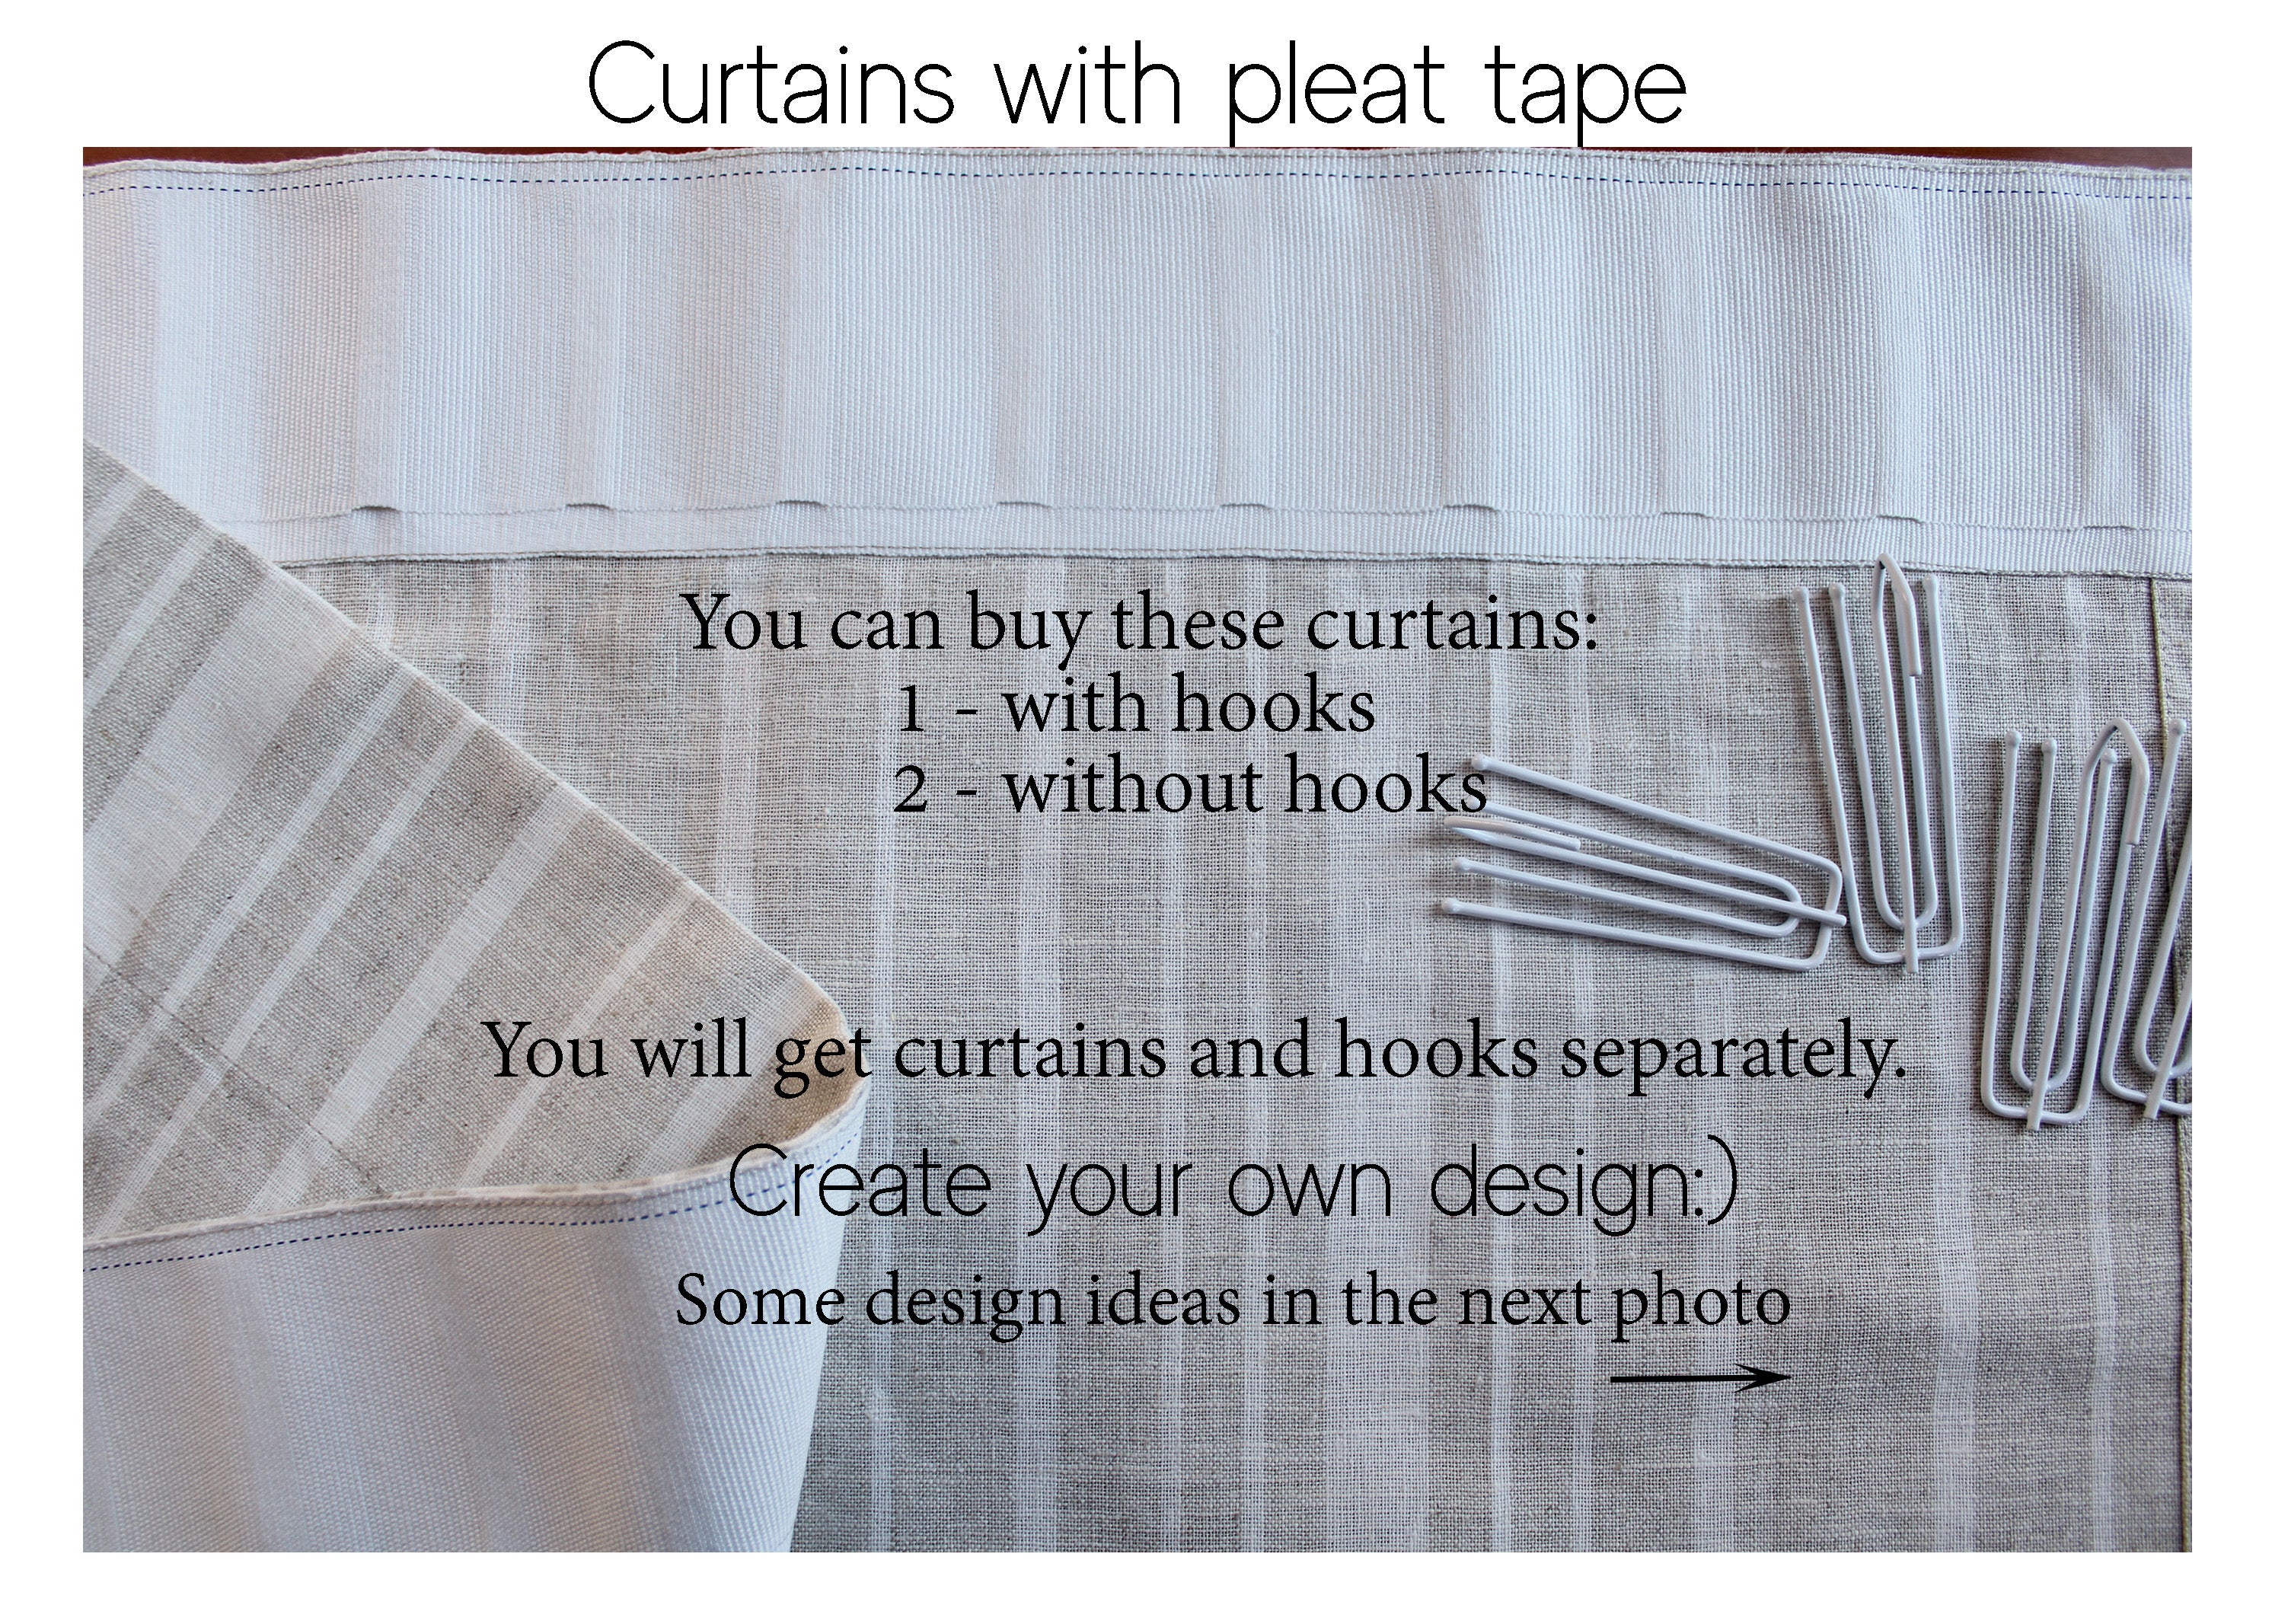 Wide Linen Curtains with Pleat tape / European Striped Linen Curtains / CUSTOM Linen Curtains